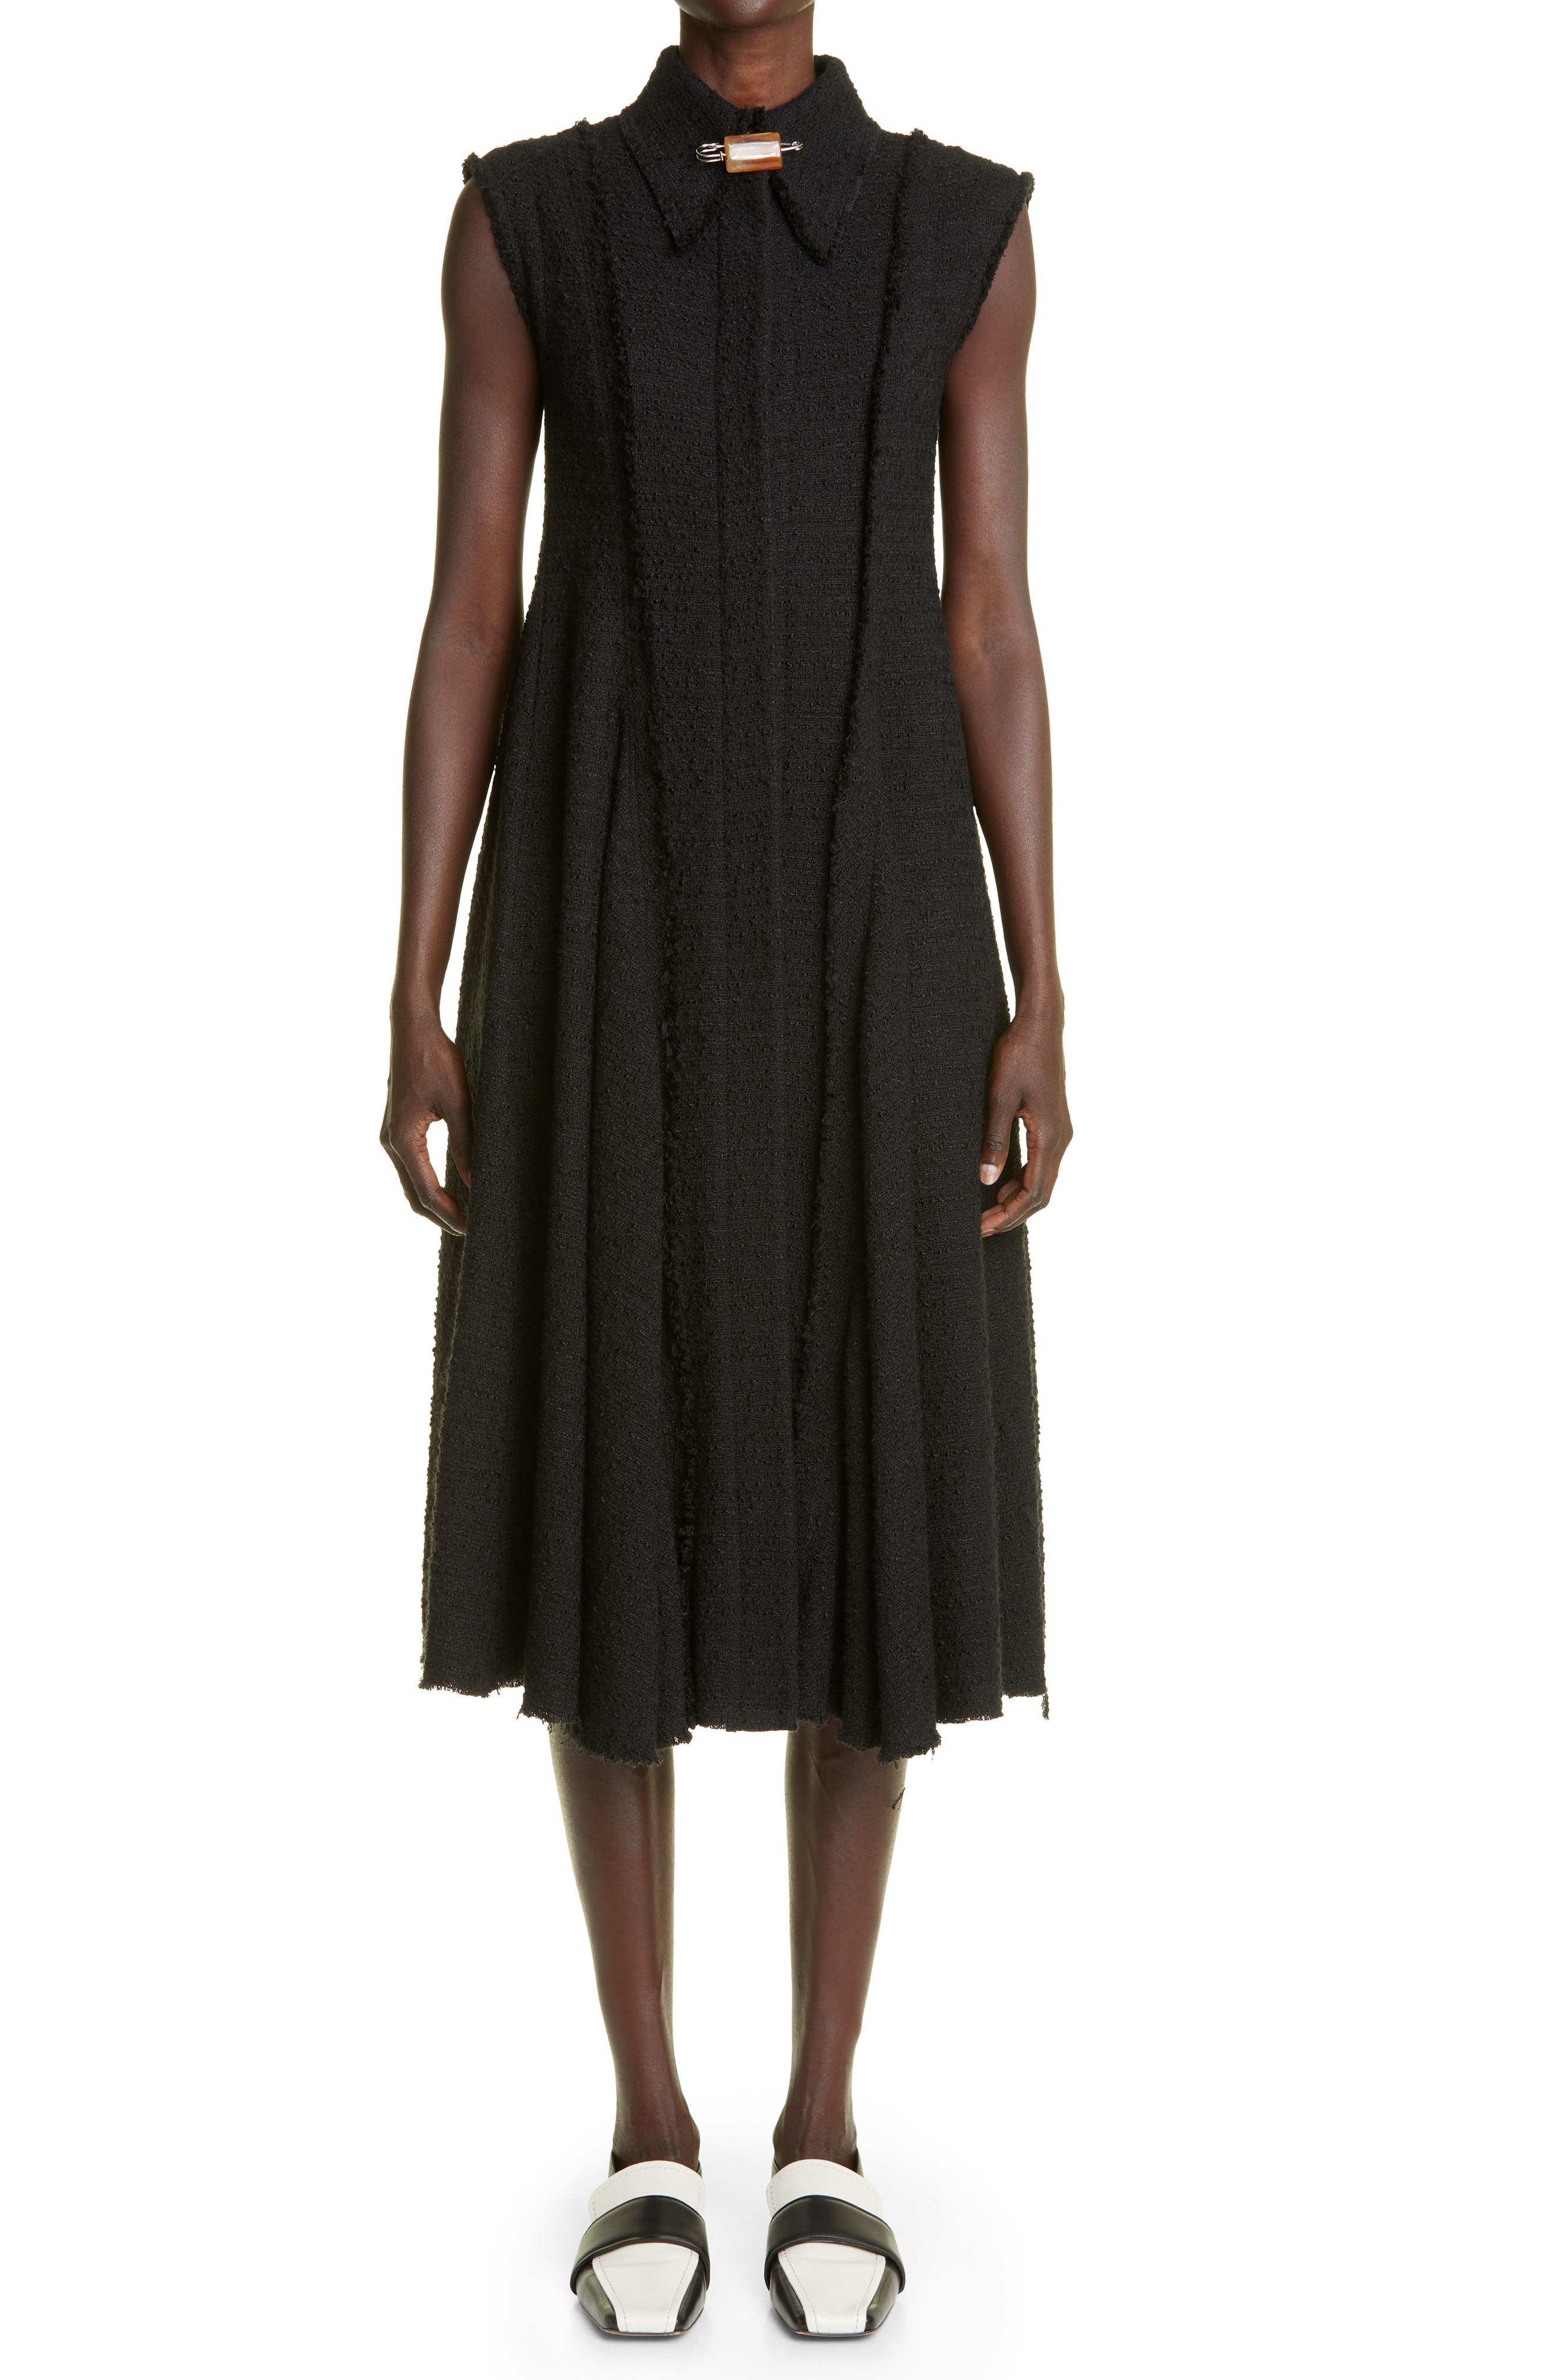 Proenza Schouler Raw Edge Sleeveless Boucle Dress in Black at Nordstrom, Size 4